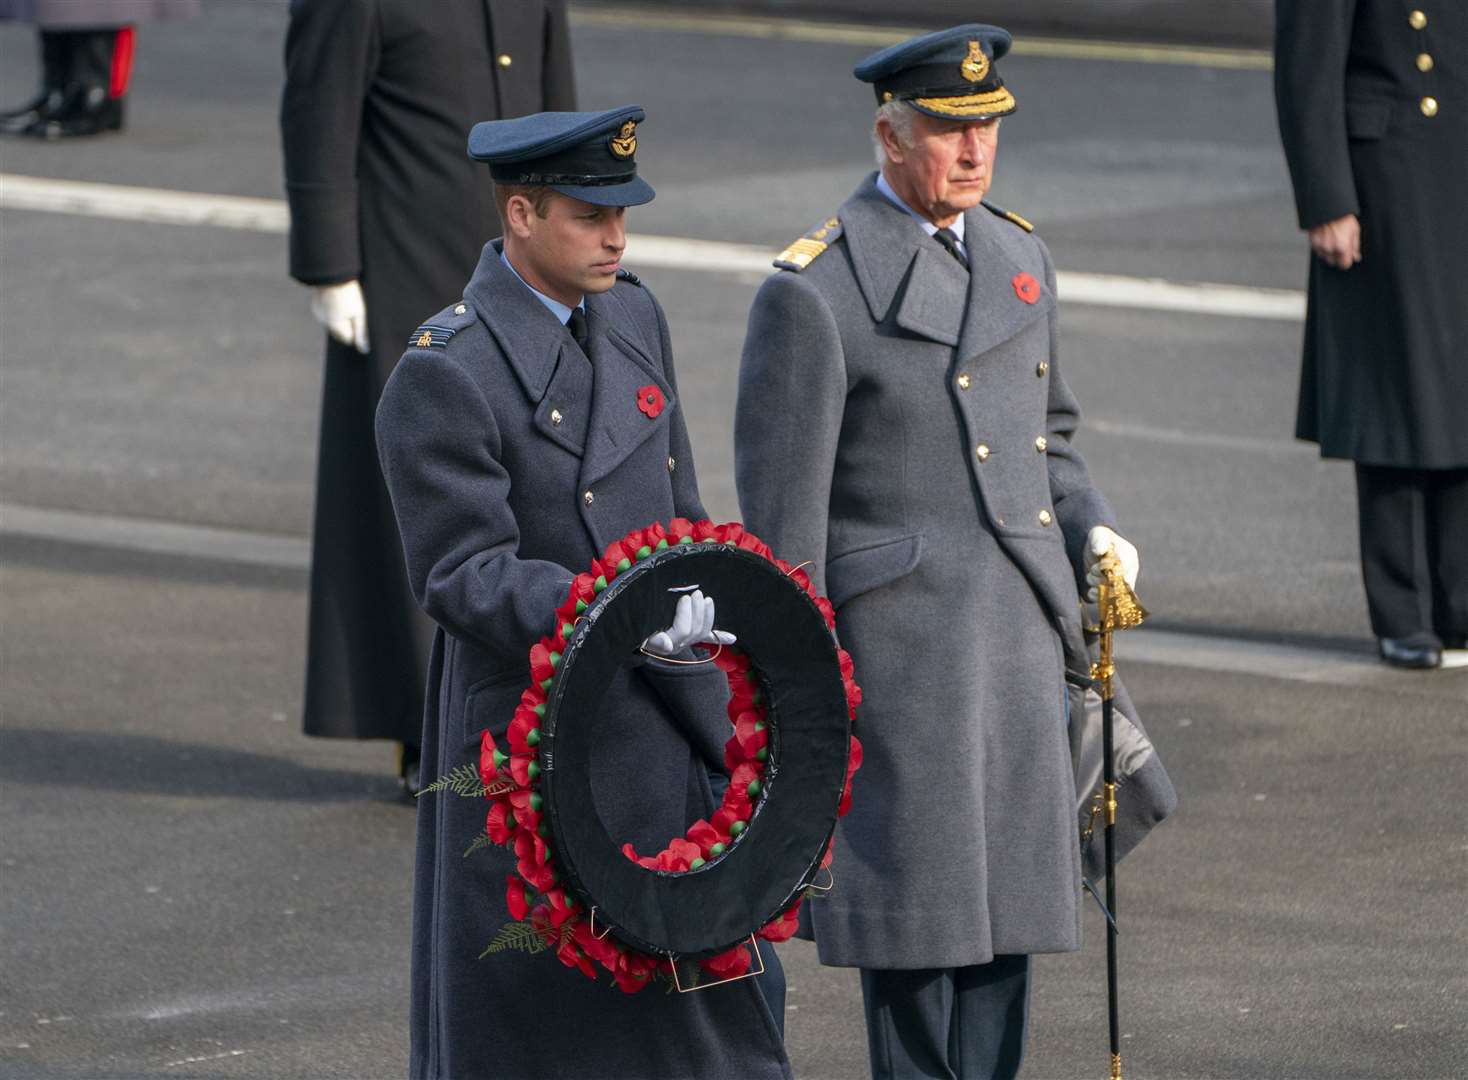 William and Charles during the Remembrance Sunday service at the Cenotaph (Arthur Edwards/The Sun/PA)